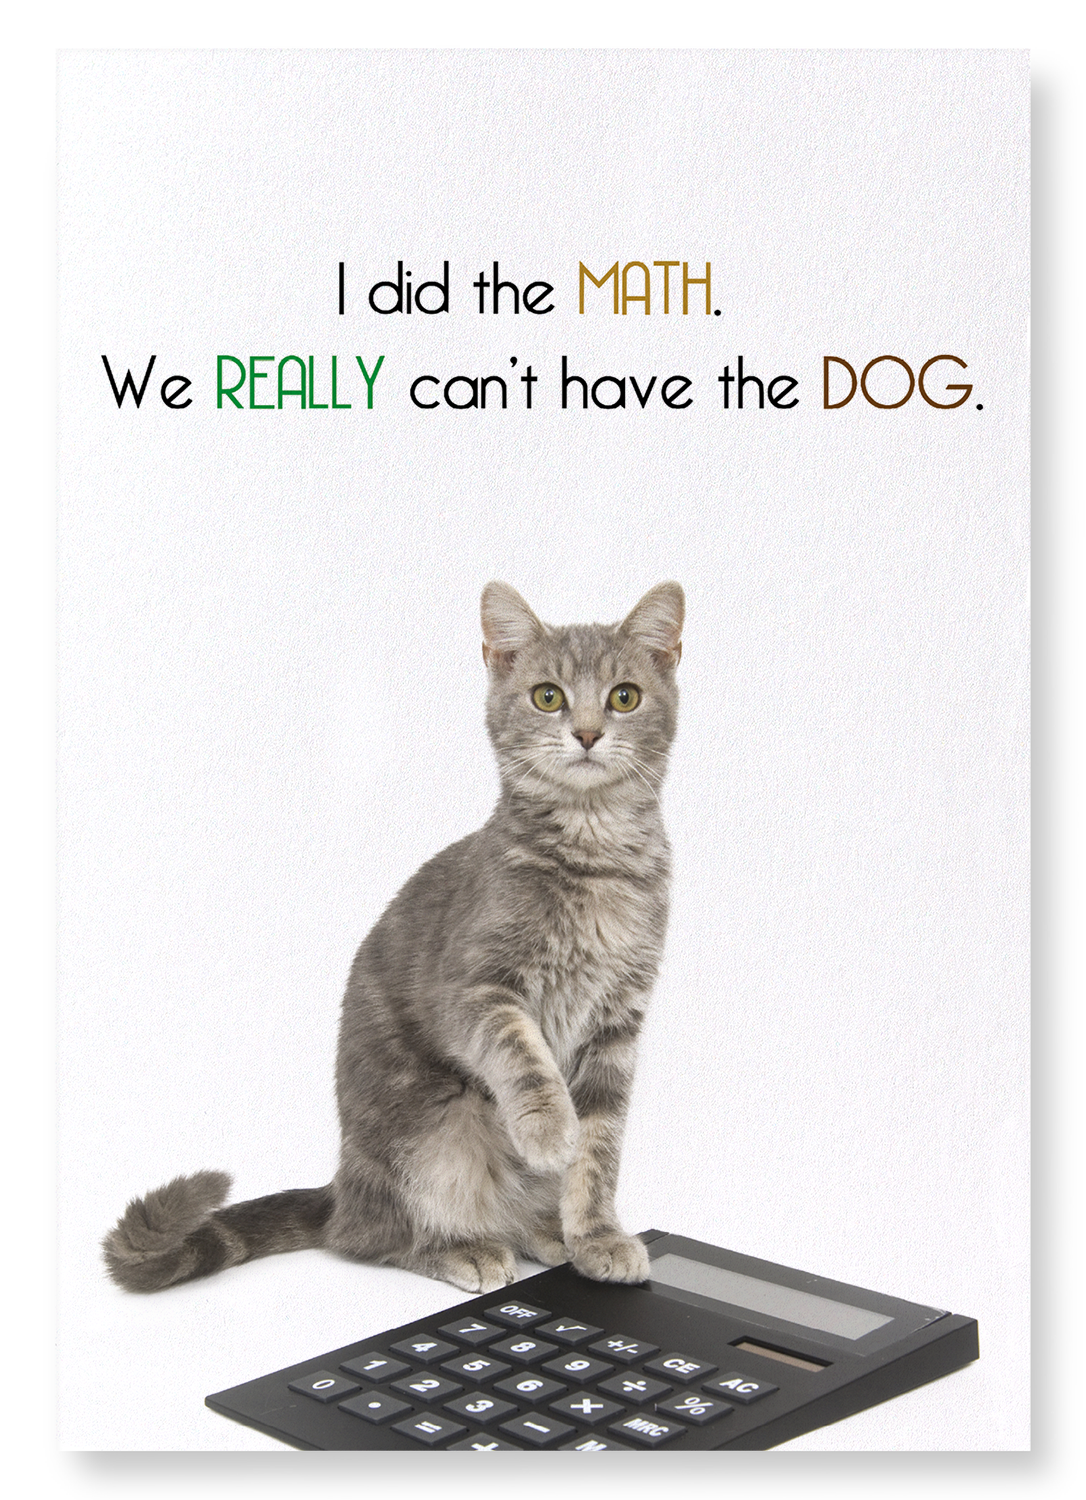 CAN'T HAVE THE DOG: Funny Animal Art print